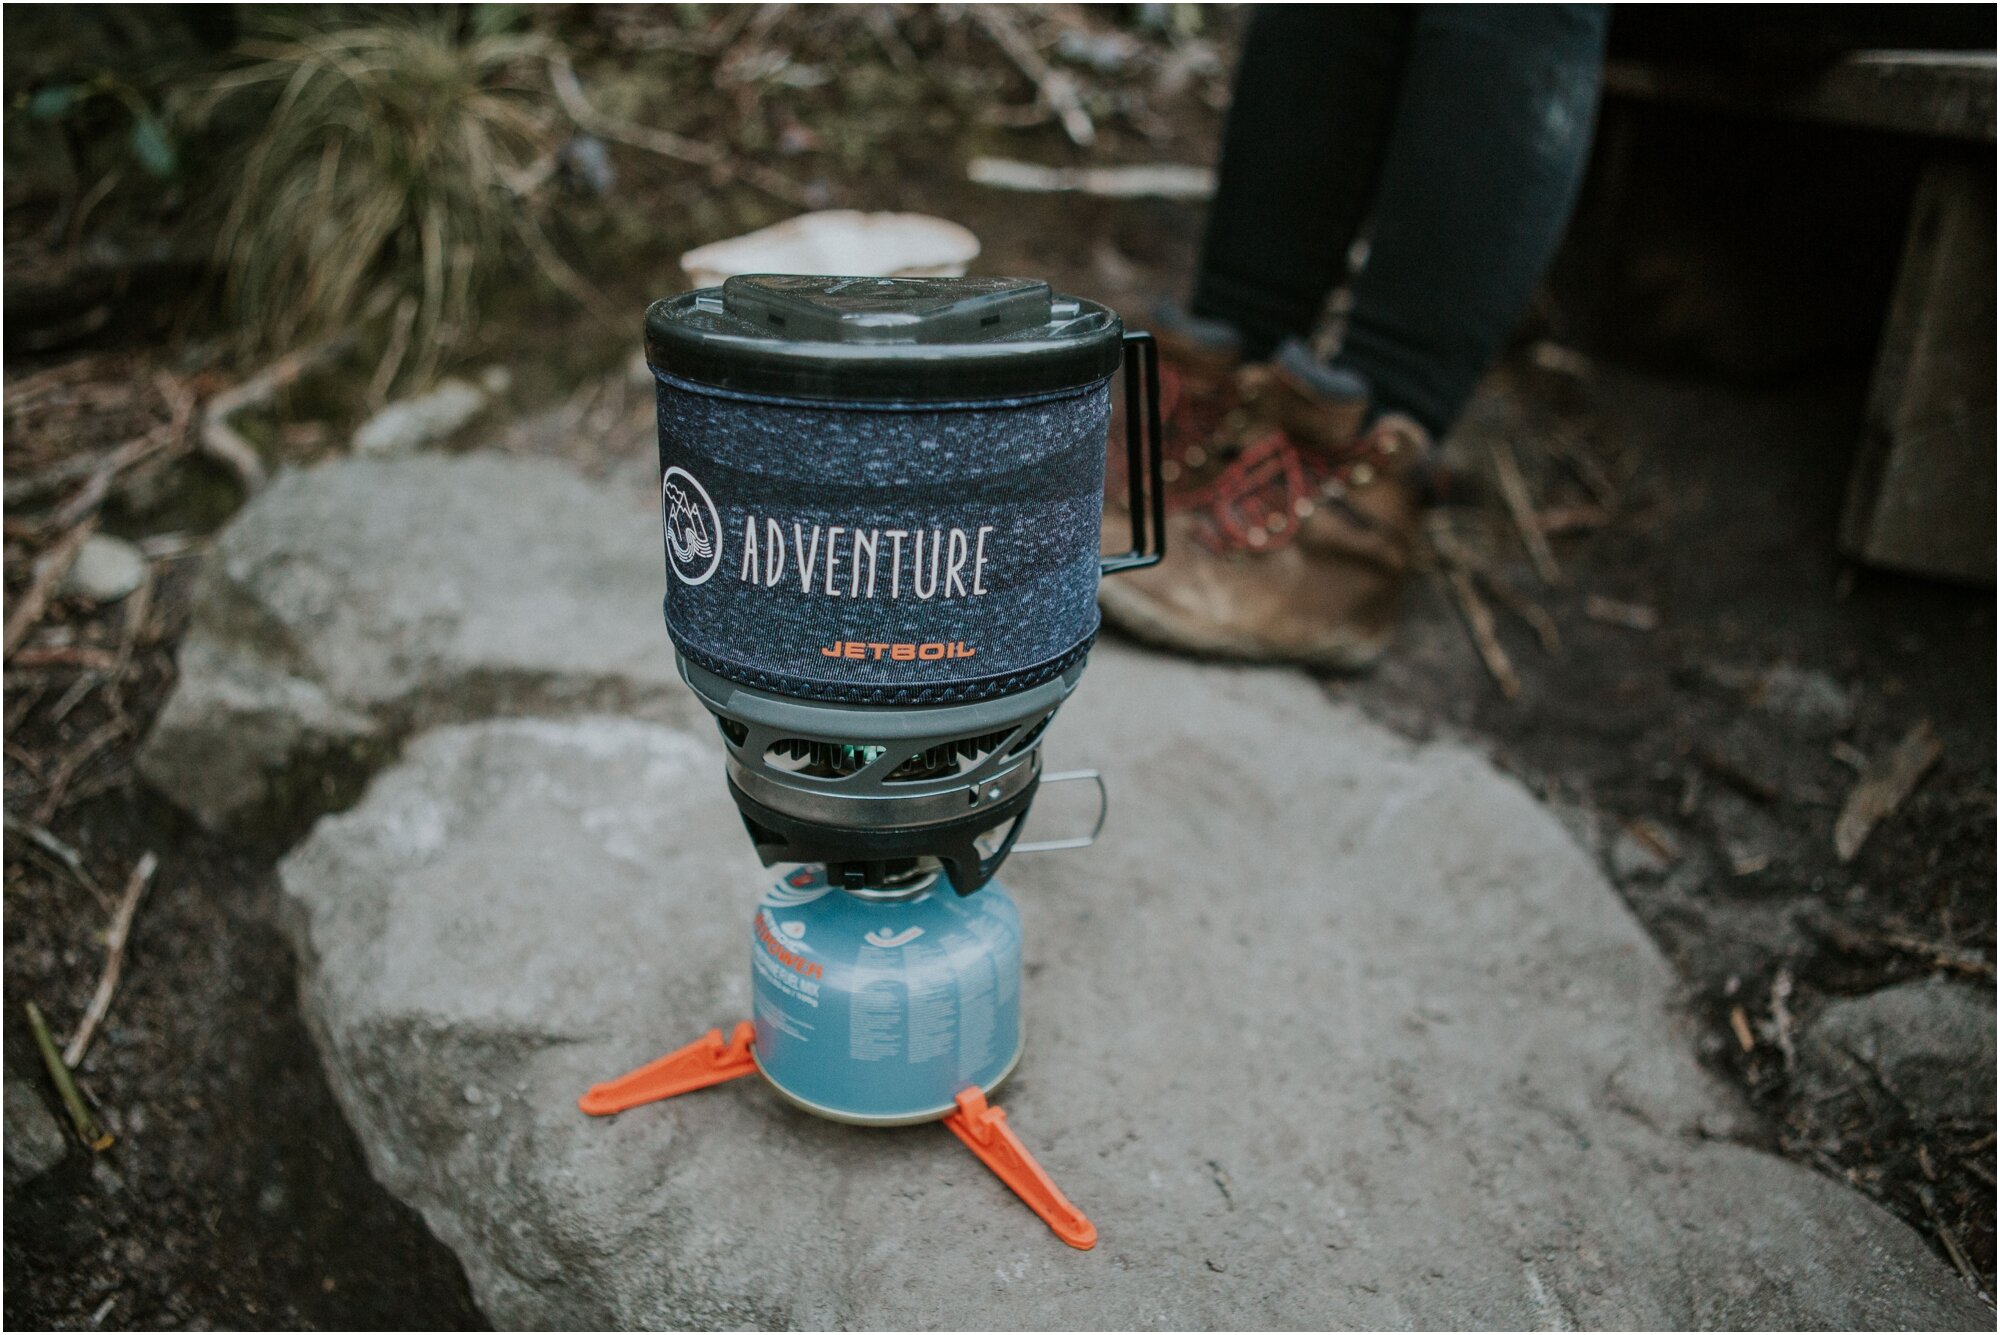   Made possible by the amazing Jetboil!  